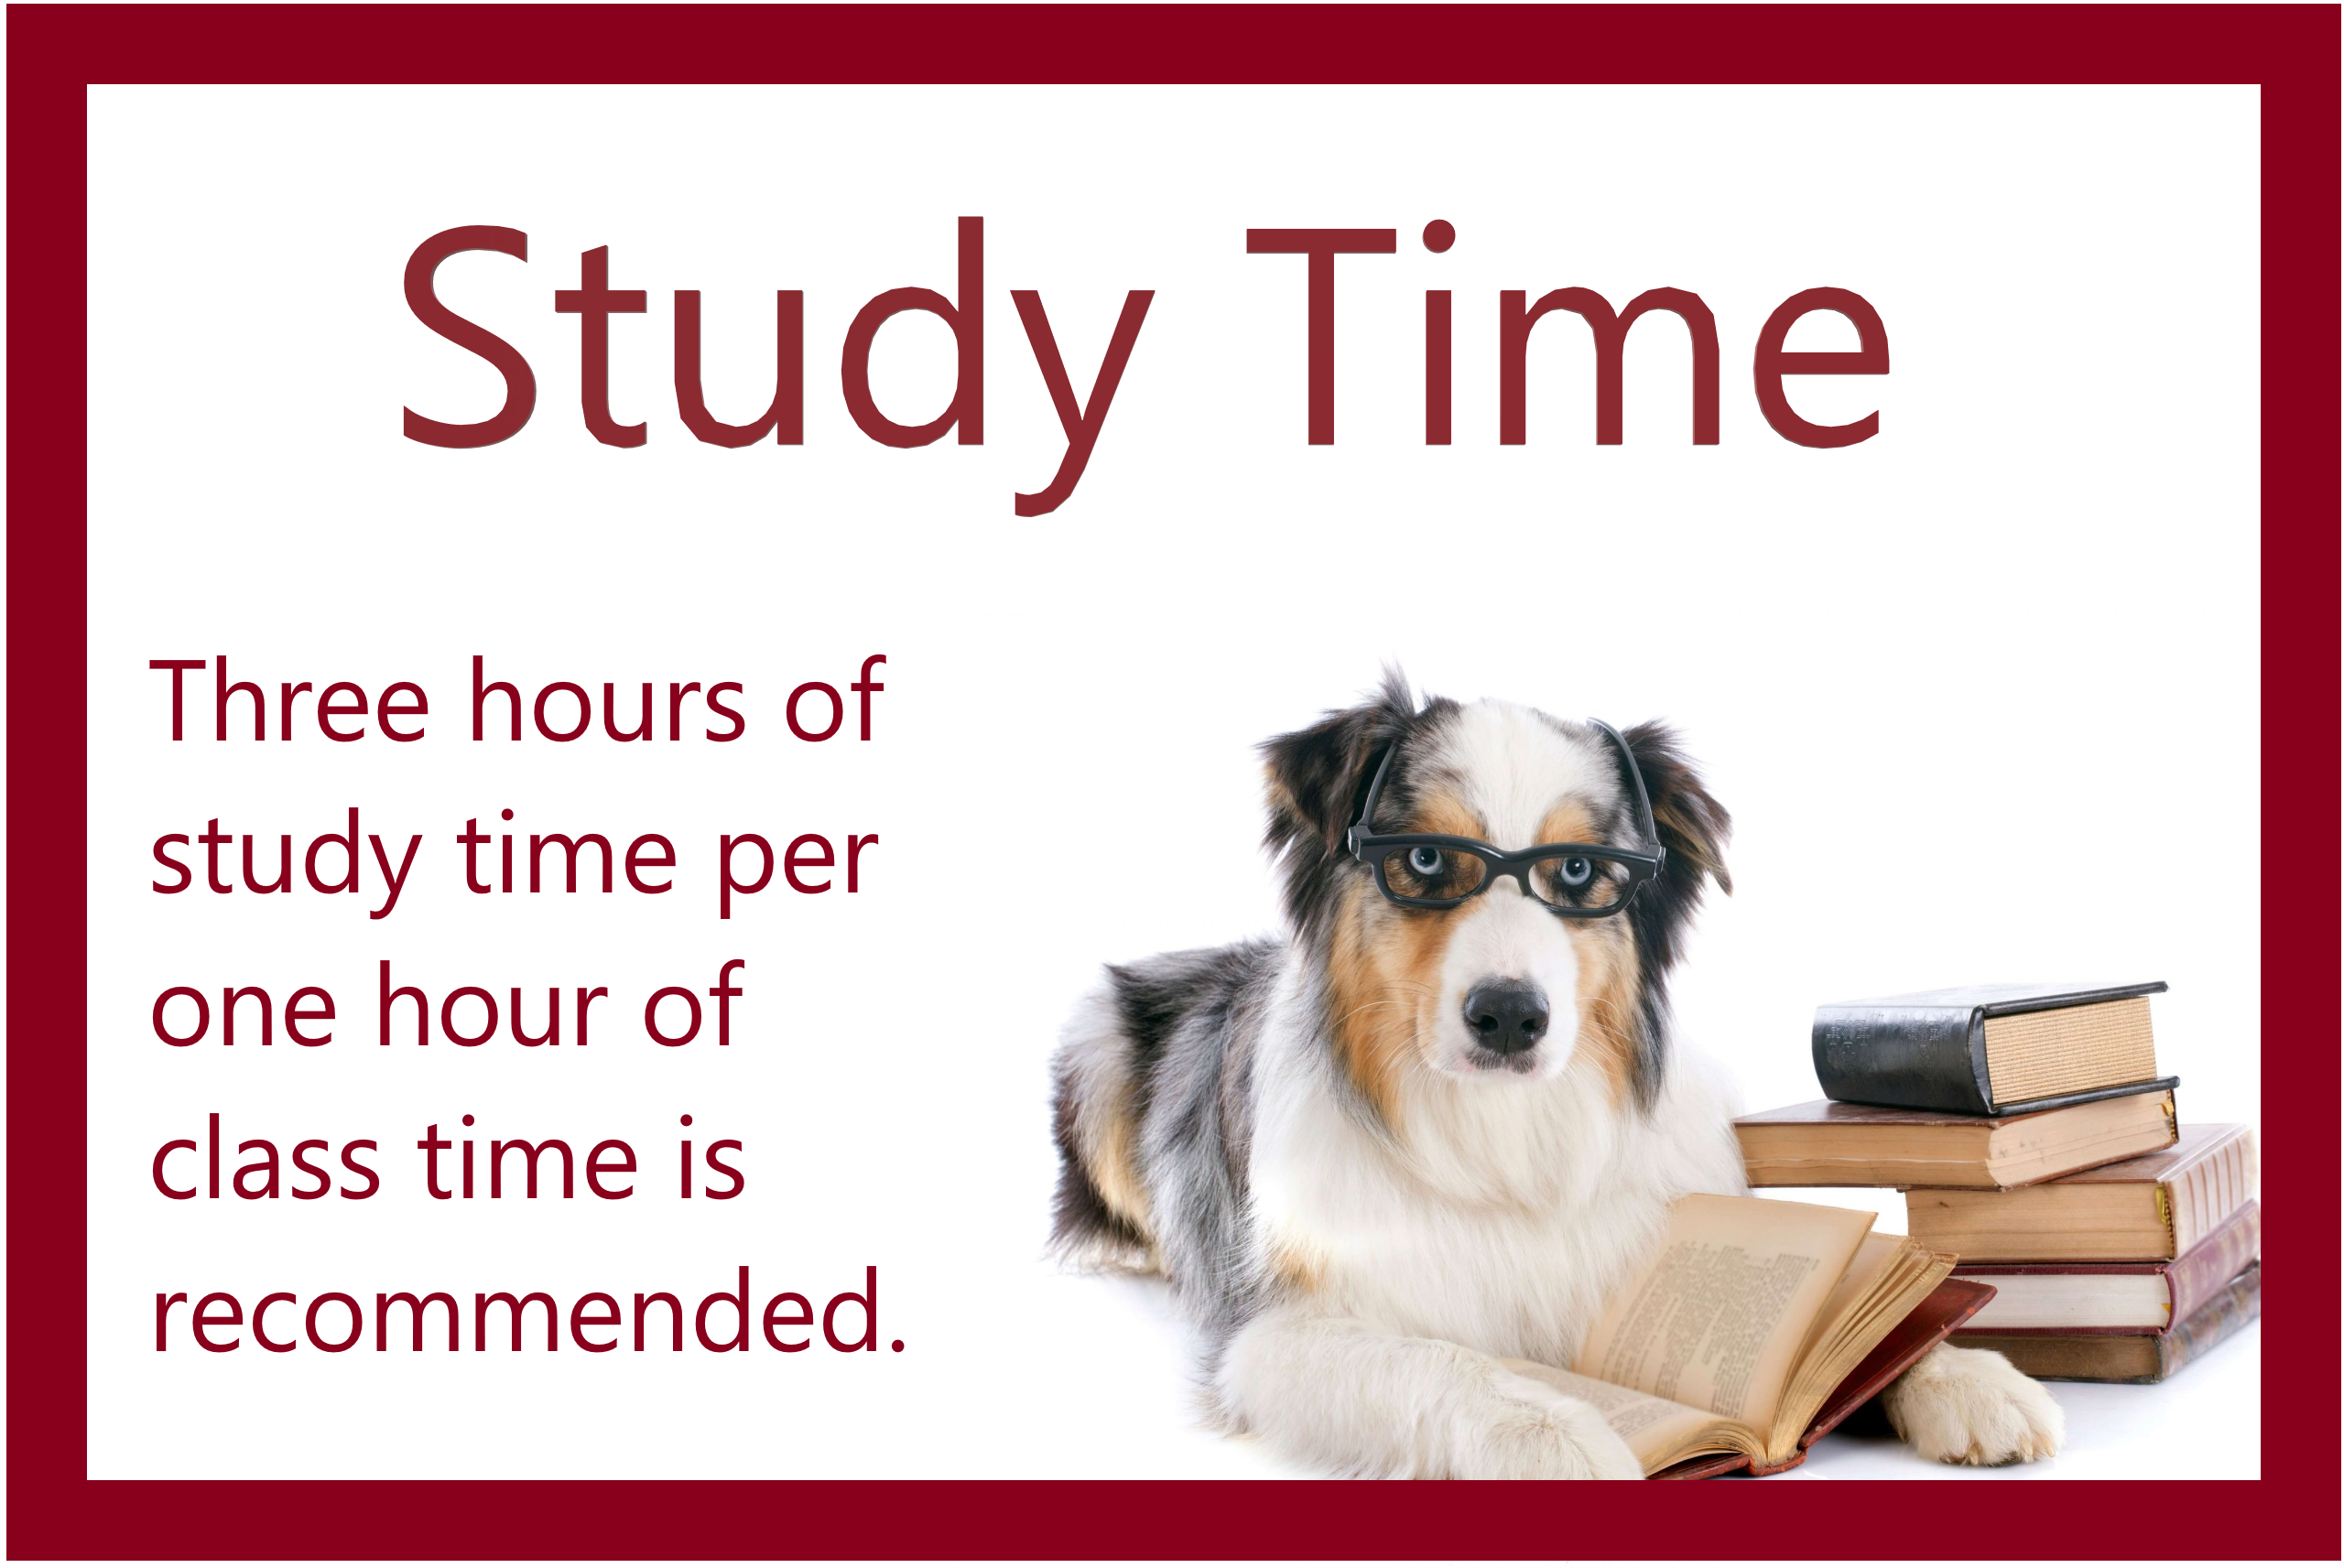 Don't forget your Study Time!